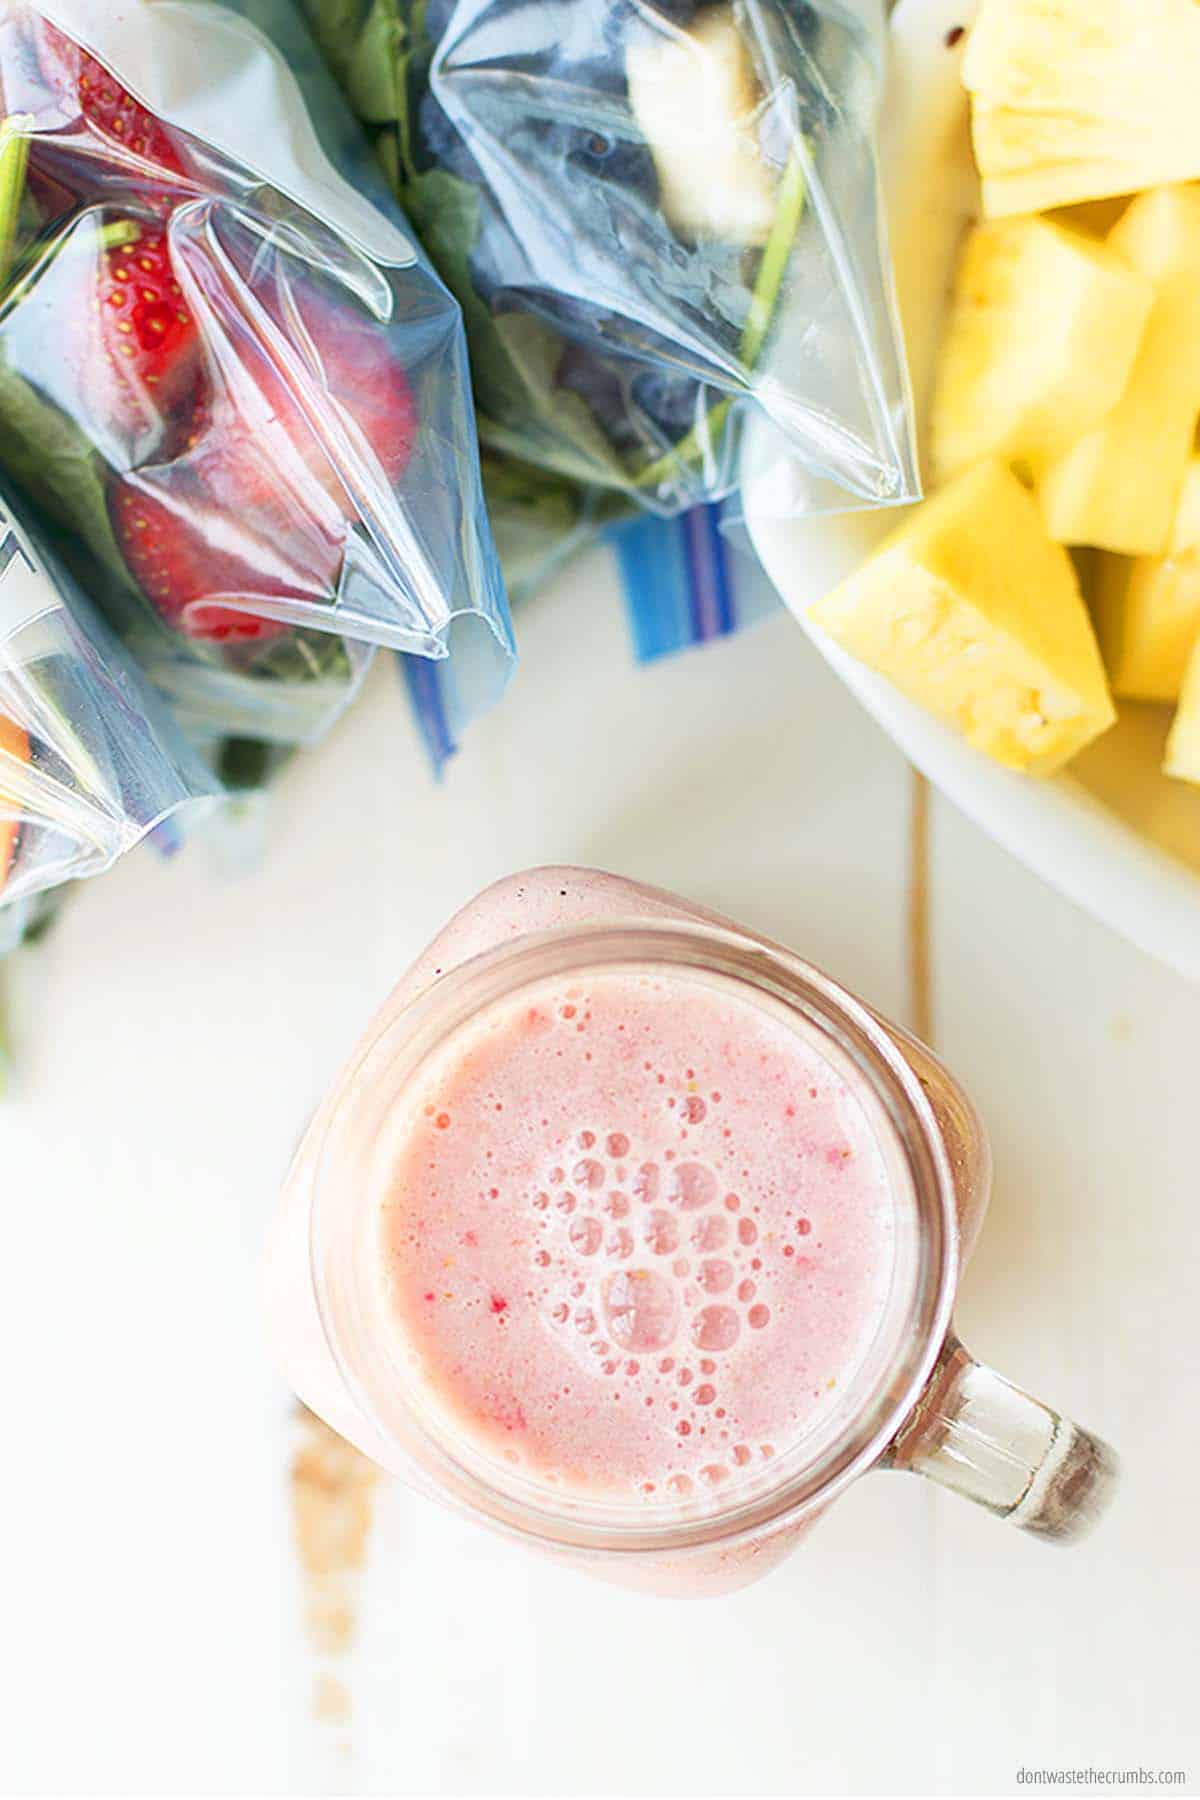 How to Make Frozen Smoothie Packs for your Freezer